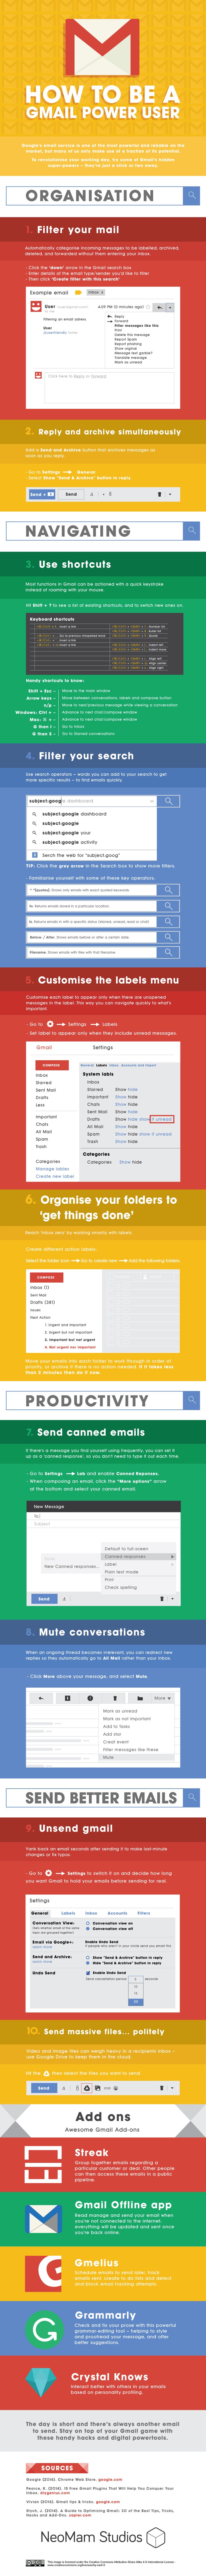 How To Be A Gmail Power User [Infographic]